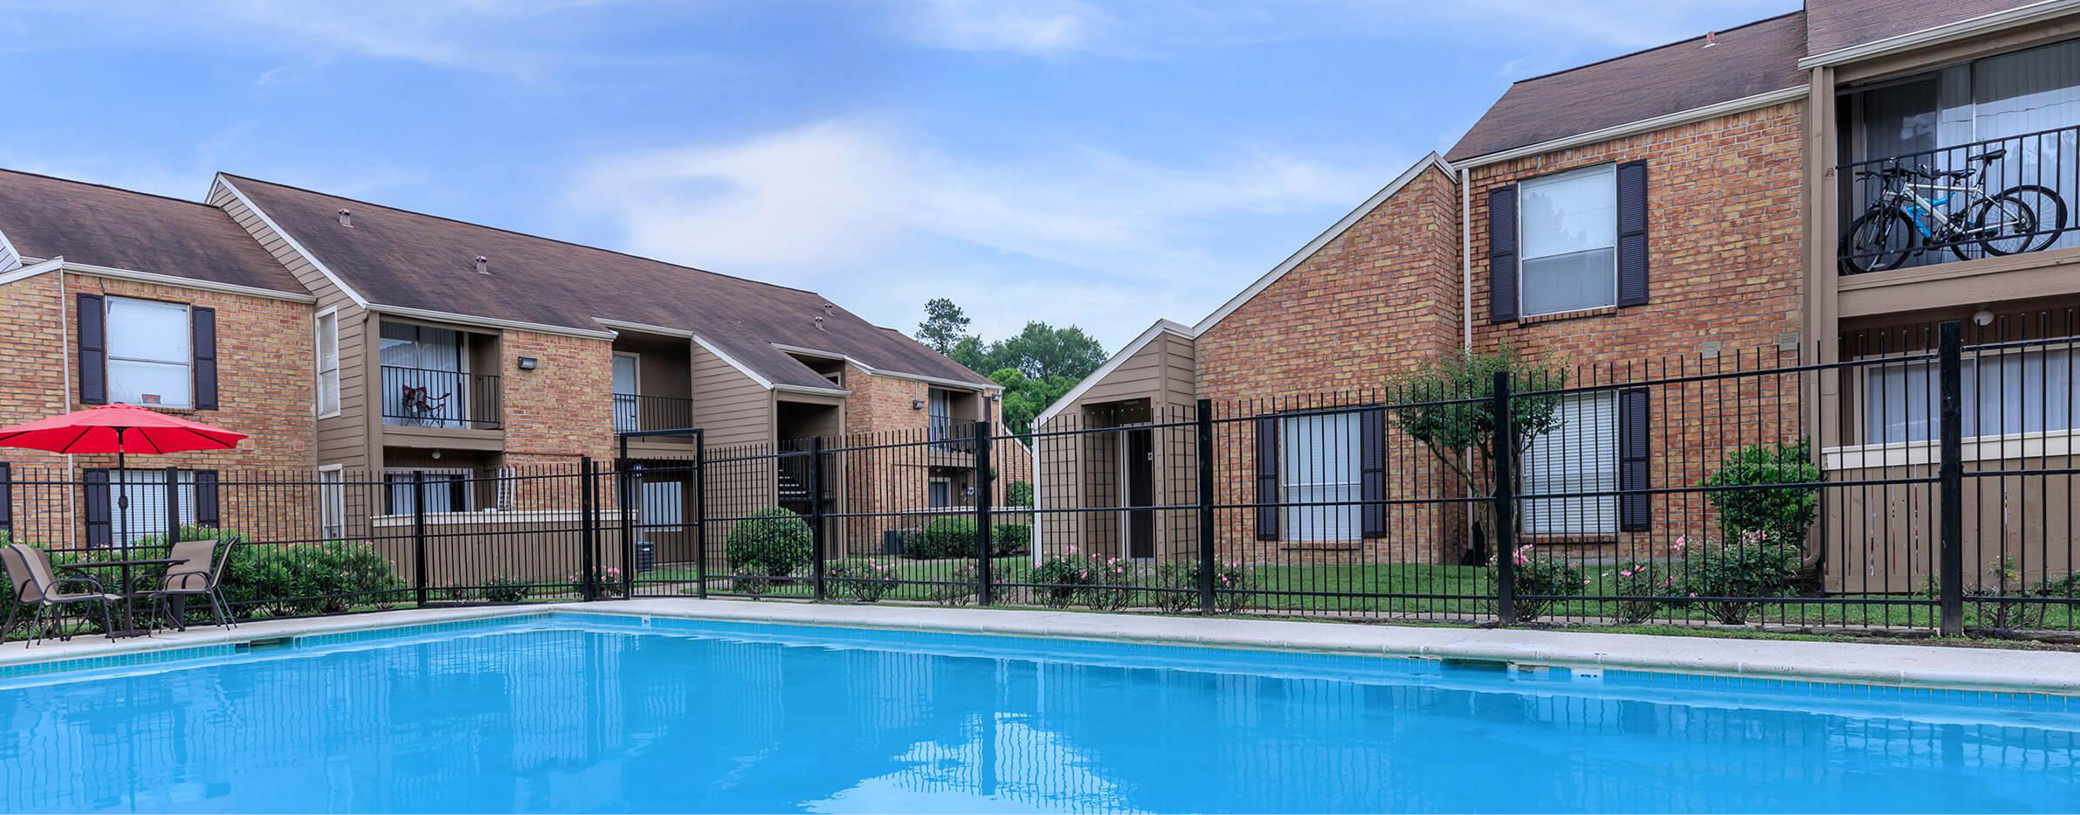 Poolside view of Pebble Creek Apartments with buildings in the background.